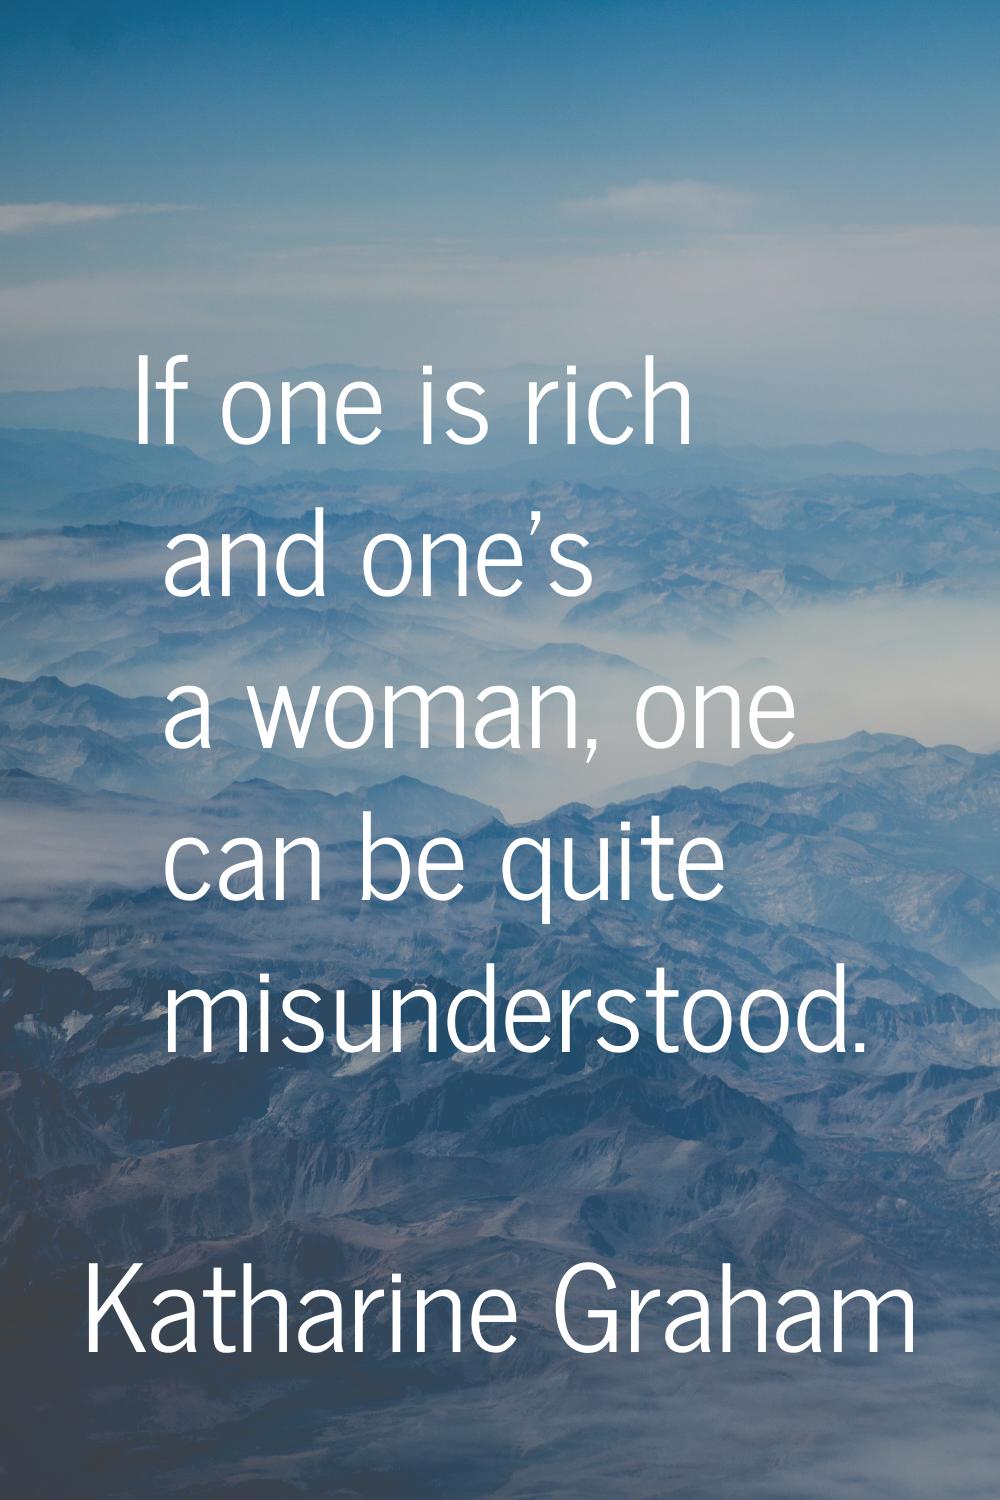 If one is rich and one's a woman, one can be quite misunderstood.